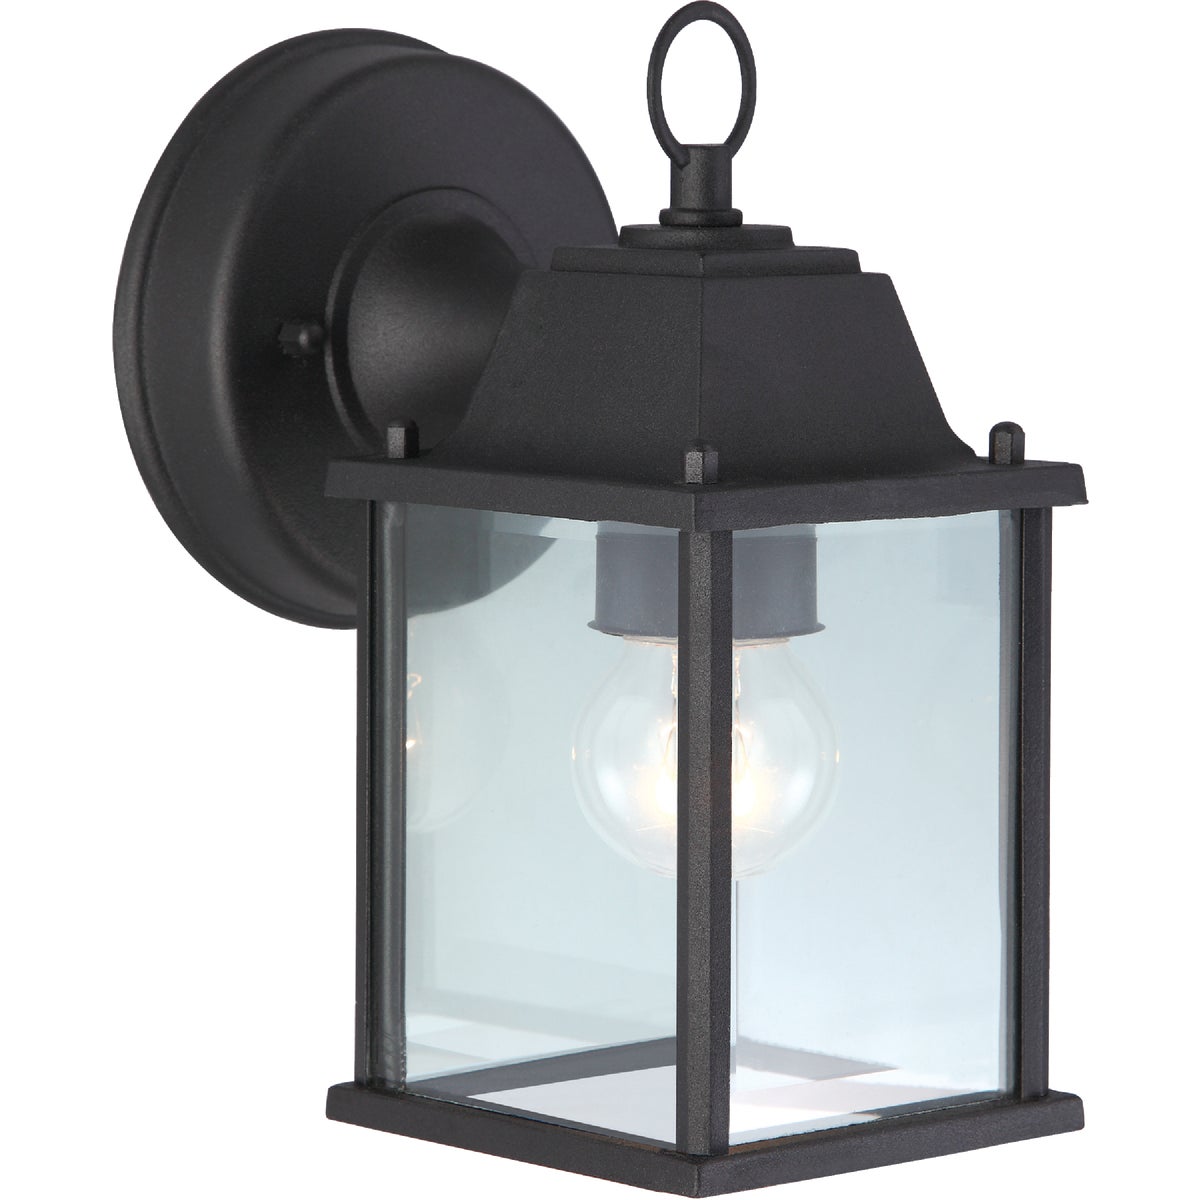 Home Impressions 100W Incandescent Black Lantern Outdoor Wall Light Fixture